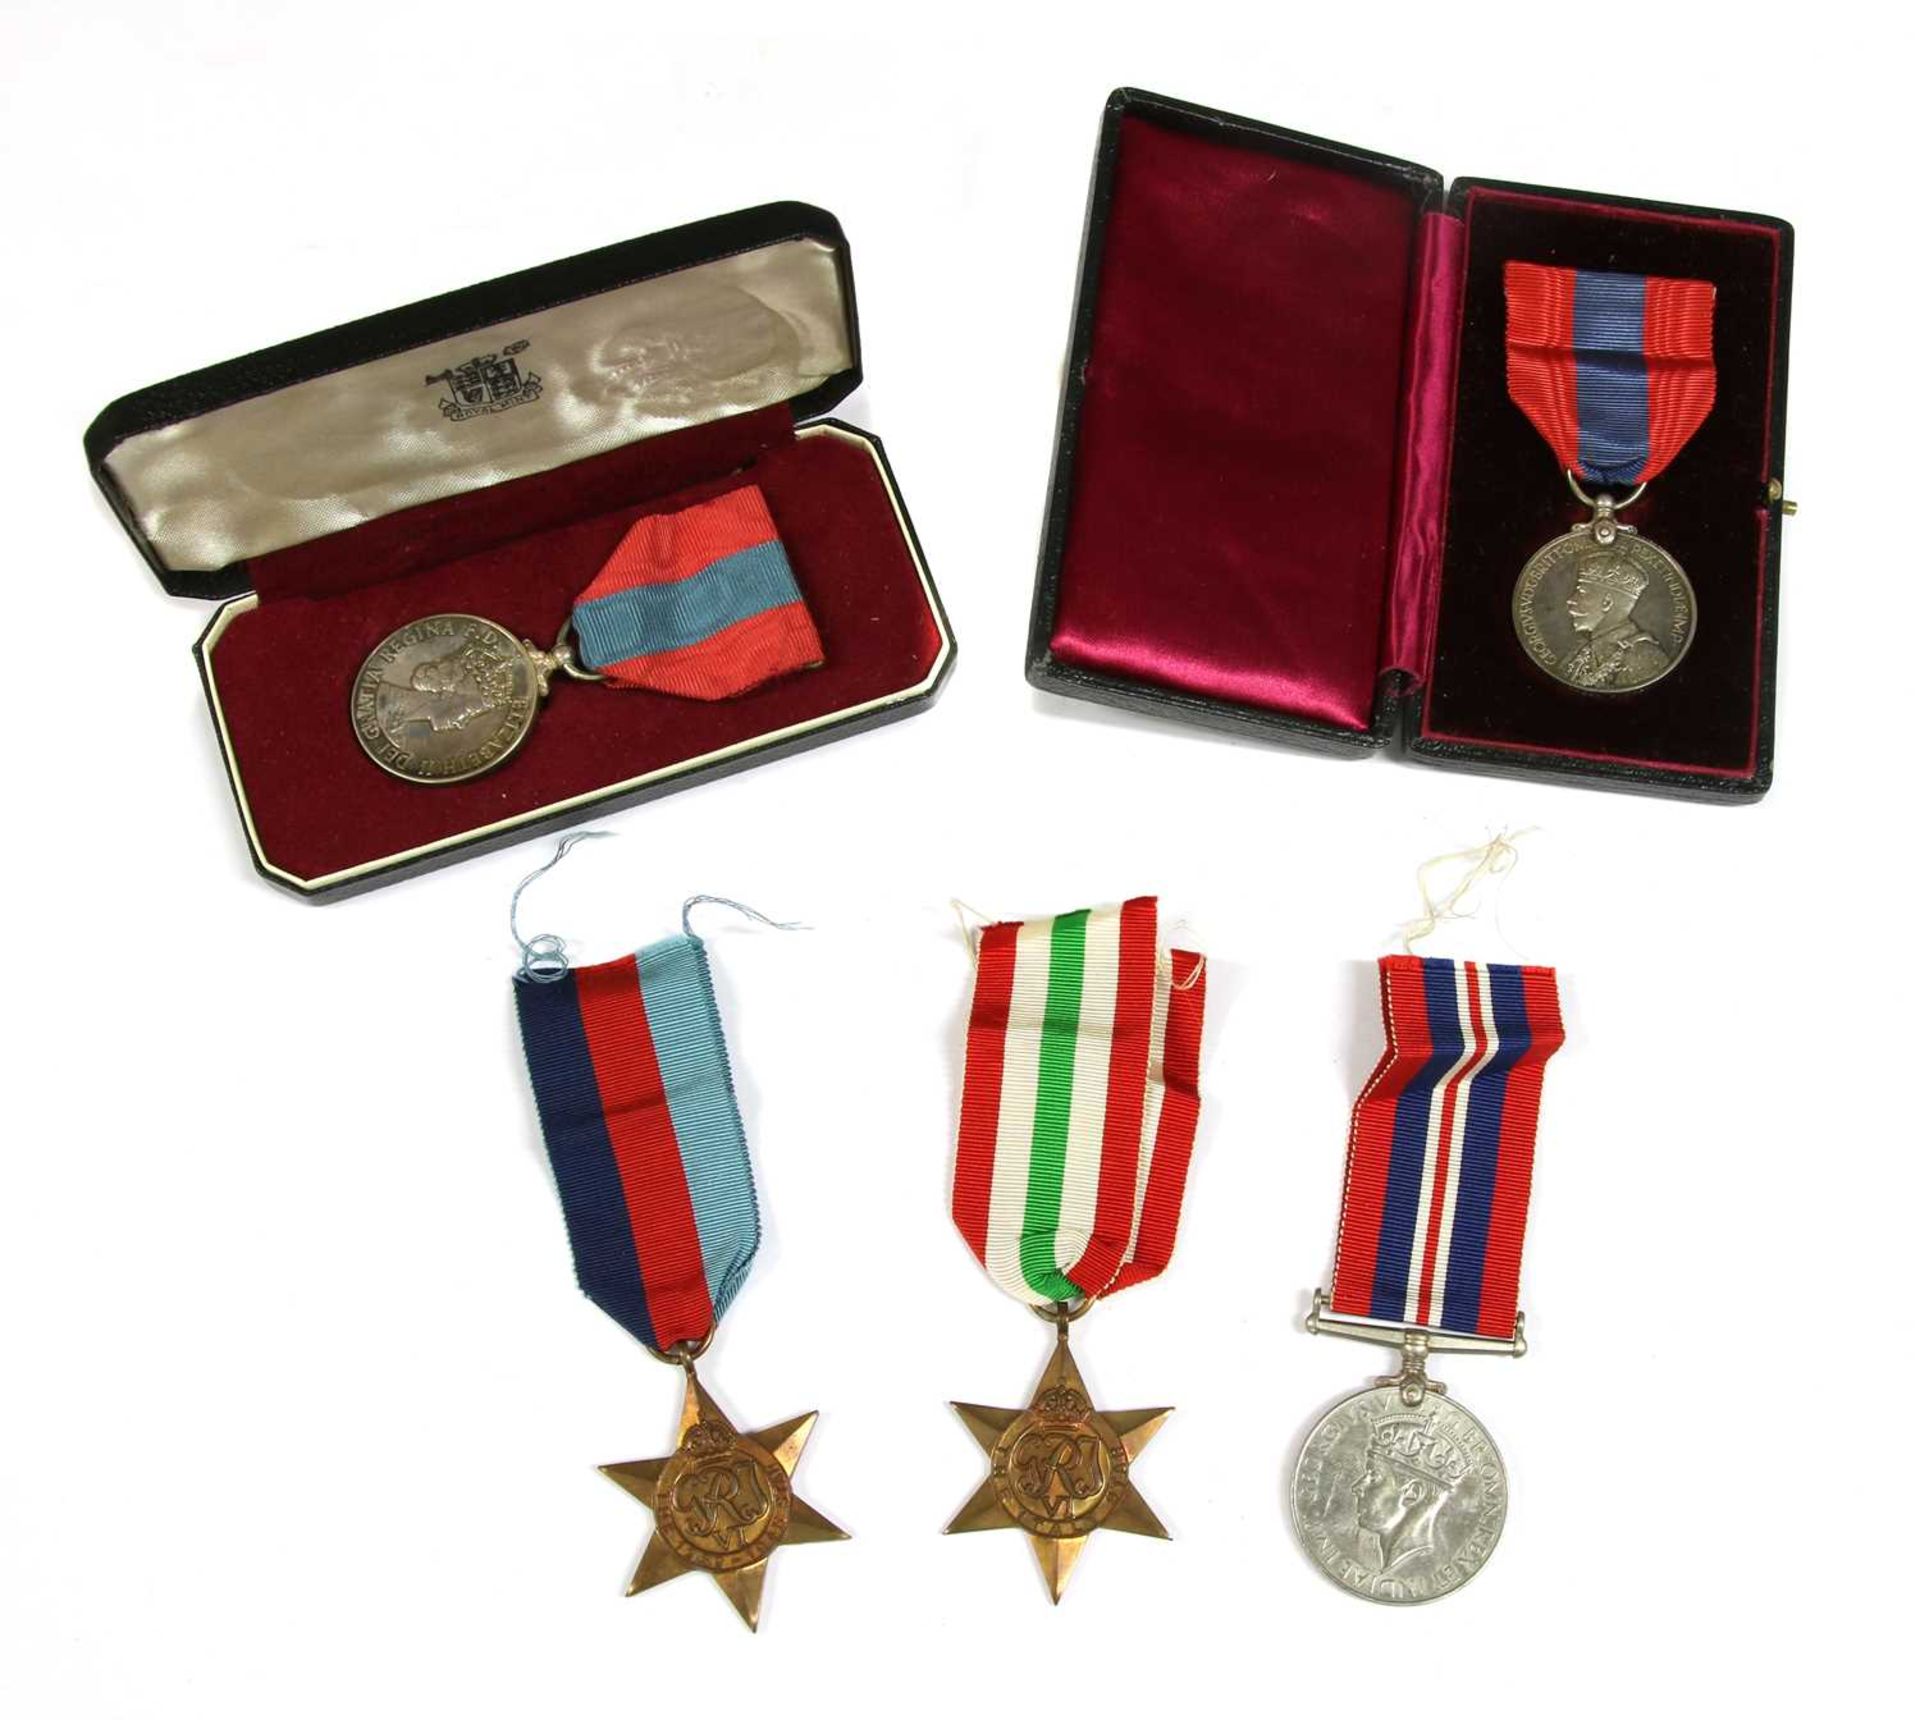 A George V Imperial Service medal